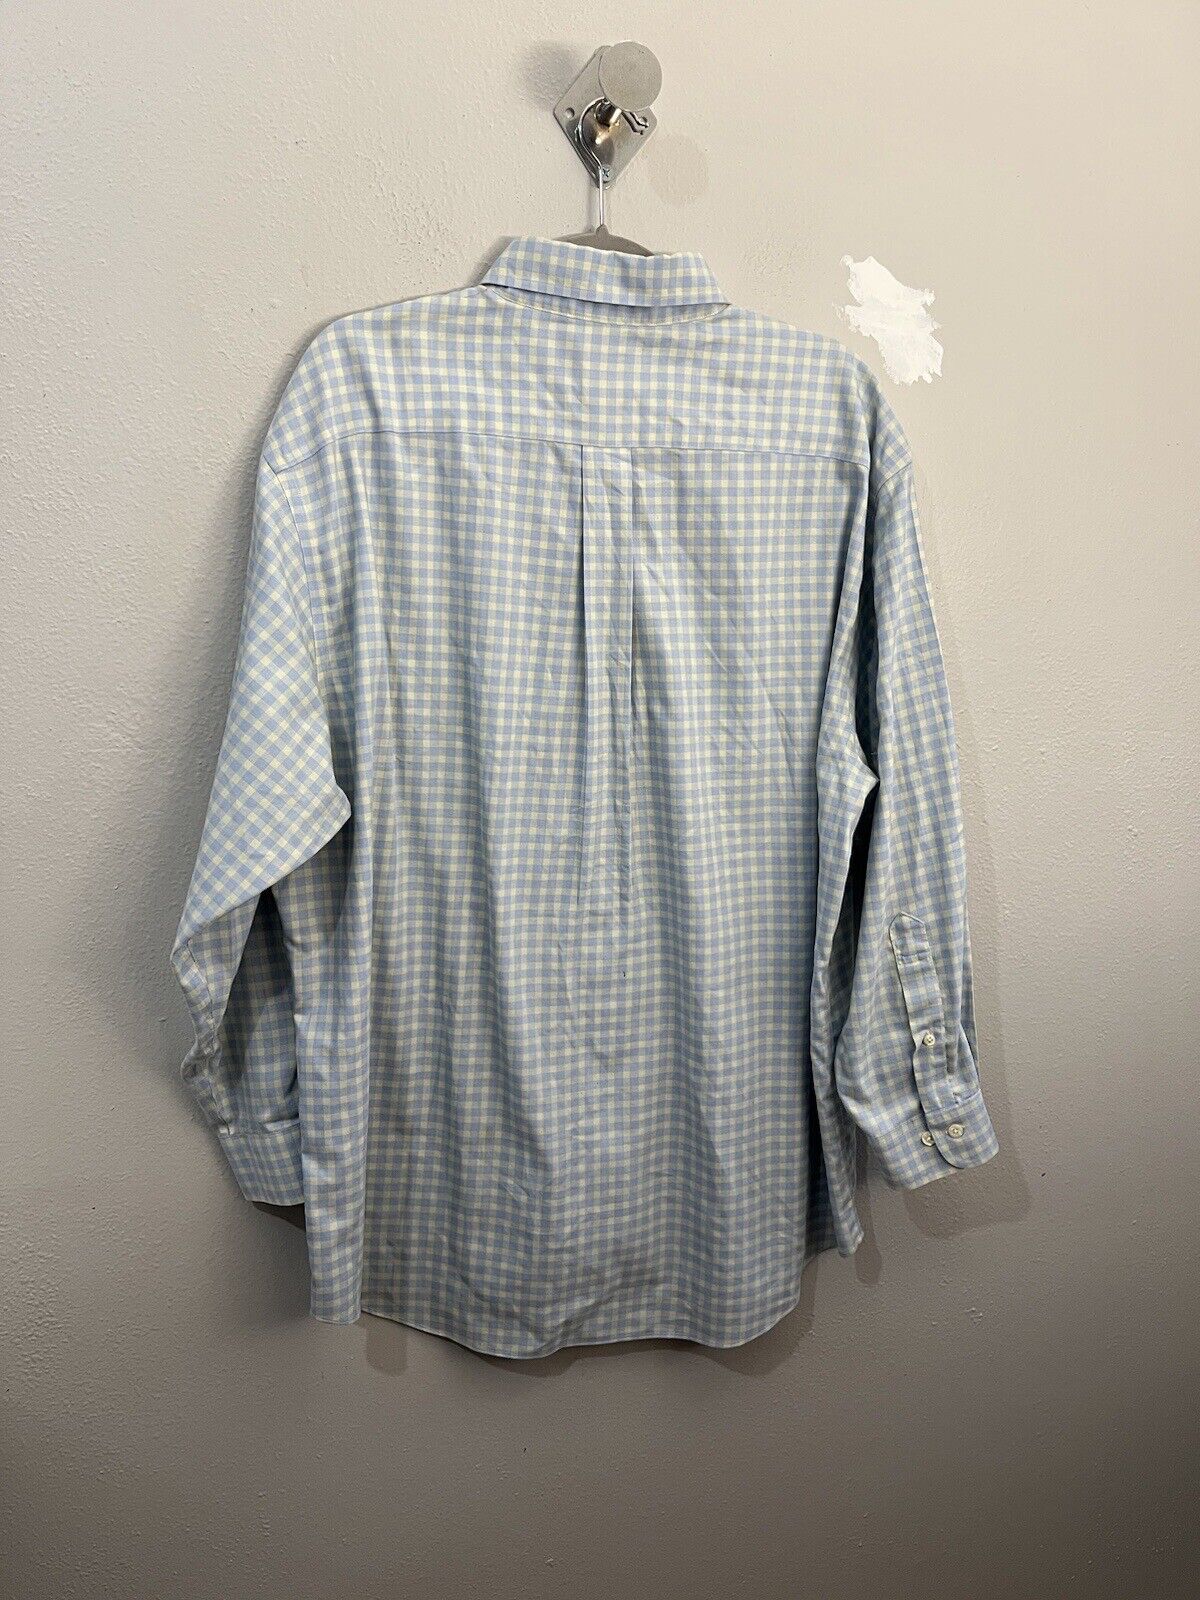 Brooks Brothers Gingham Check Shirt Mens XL The O… - image 4